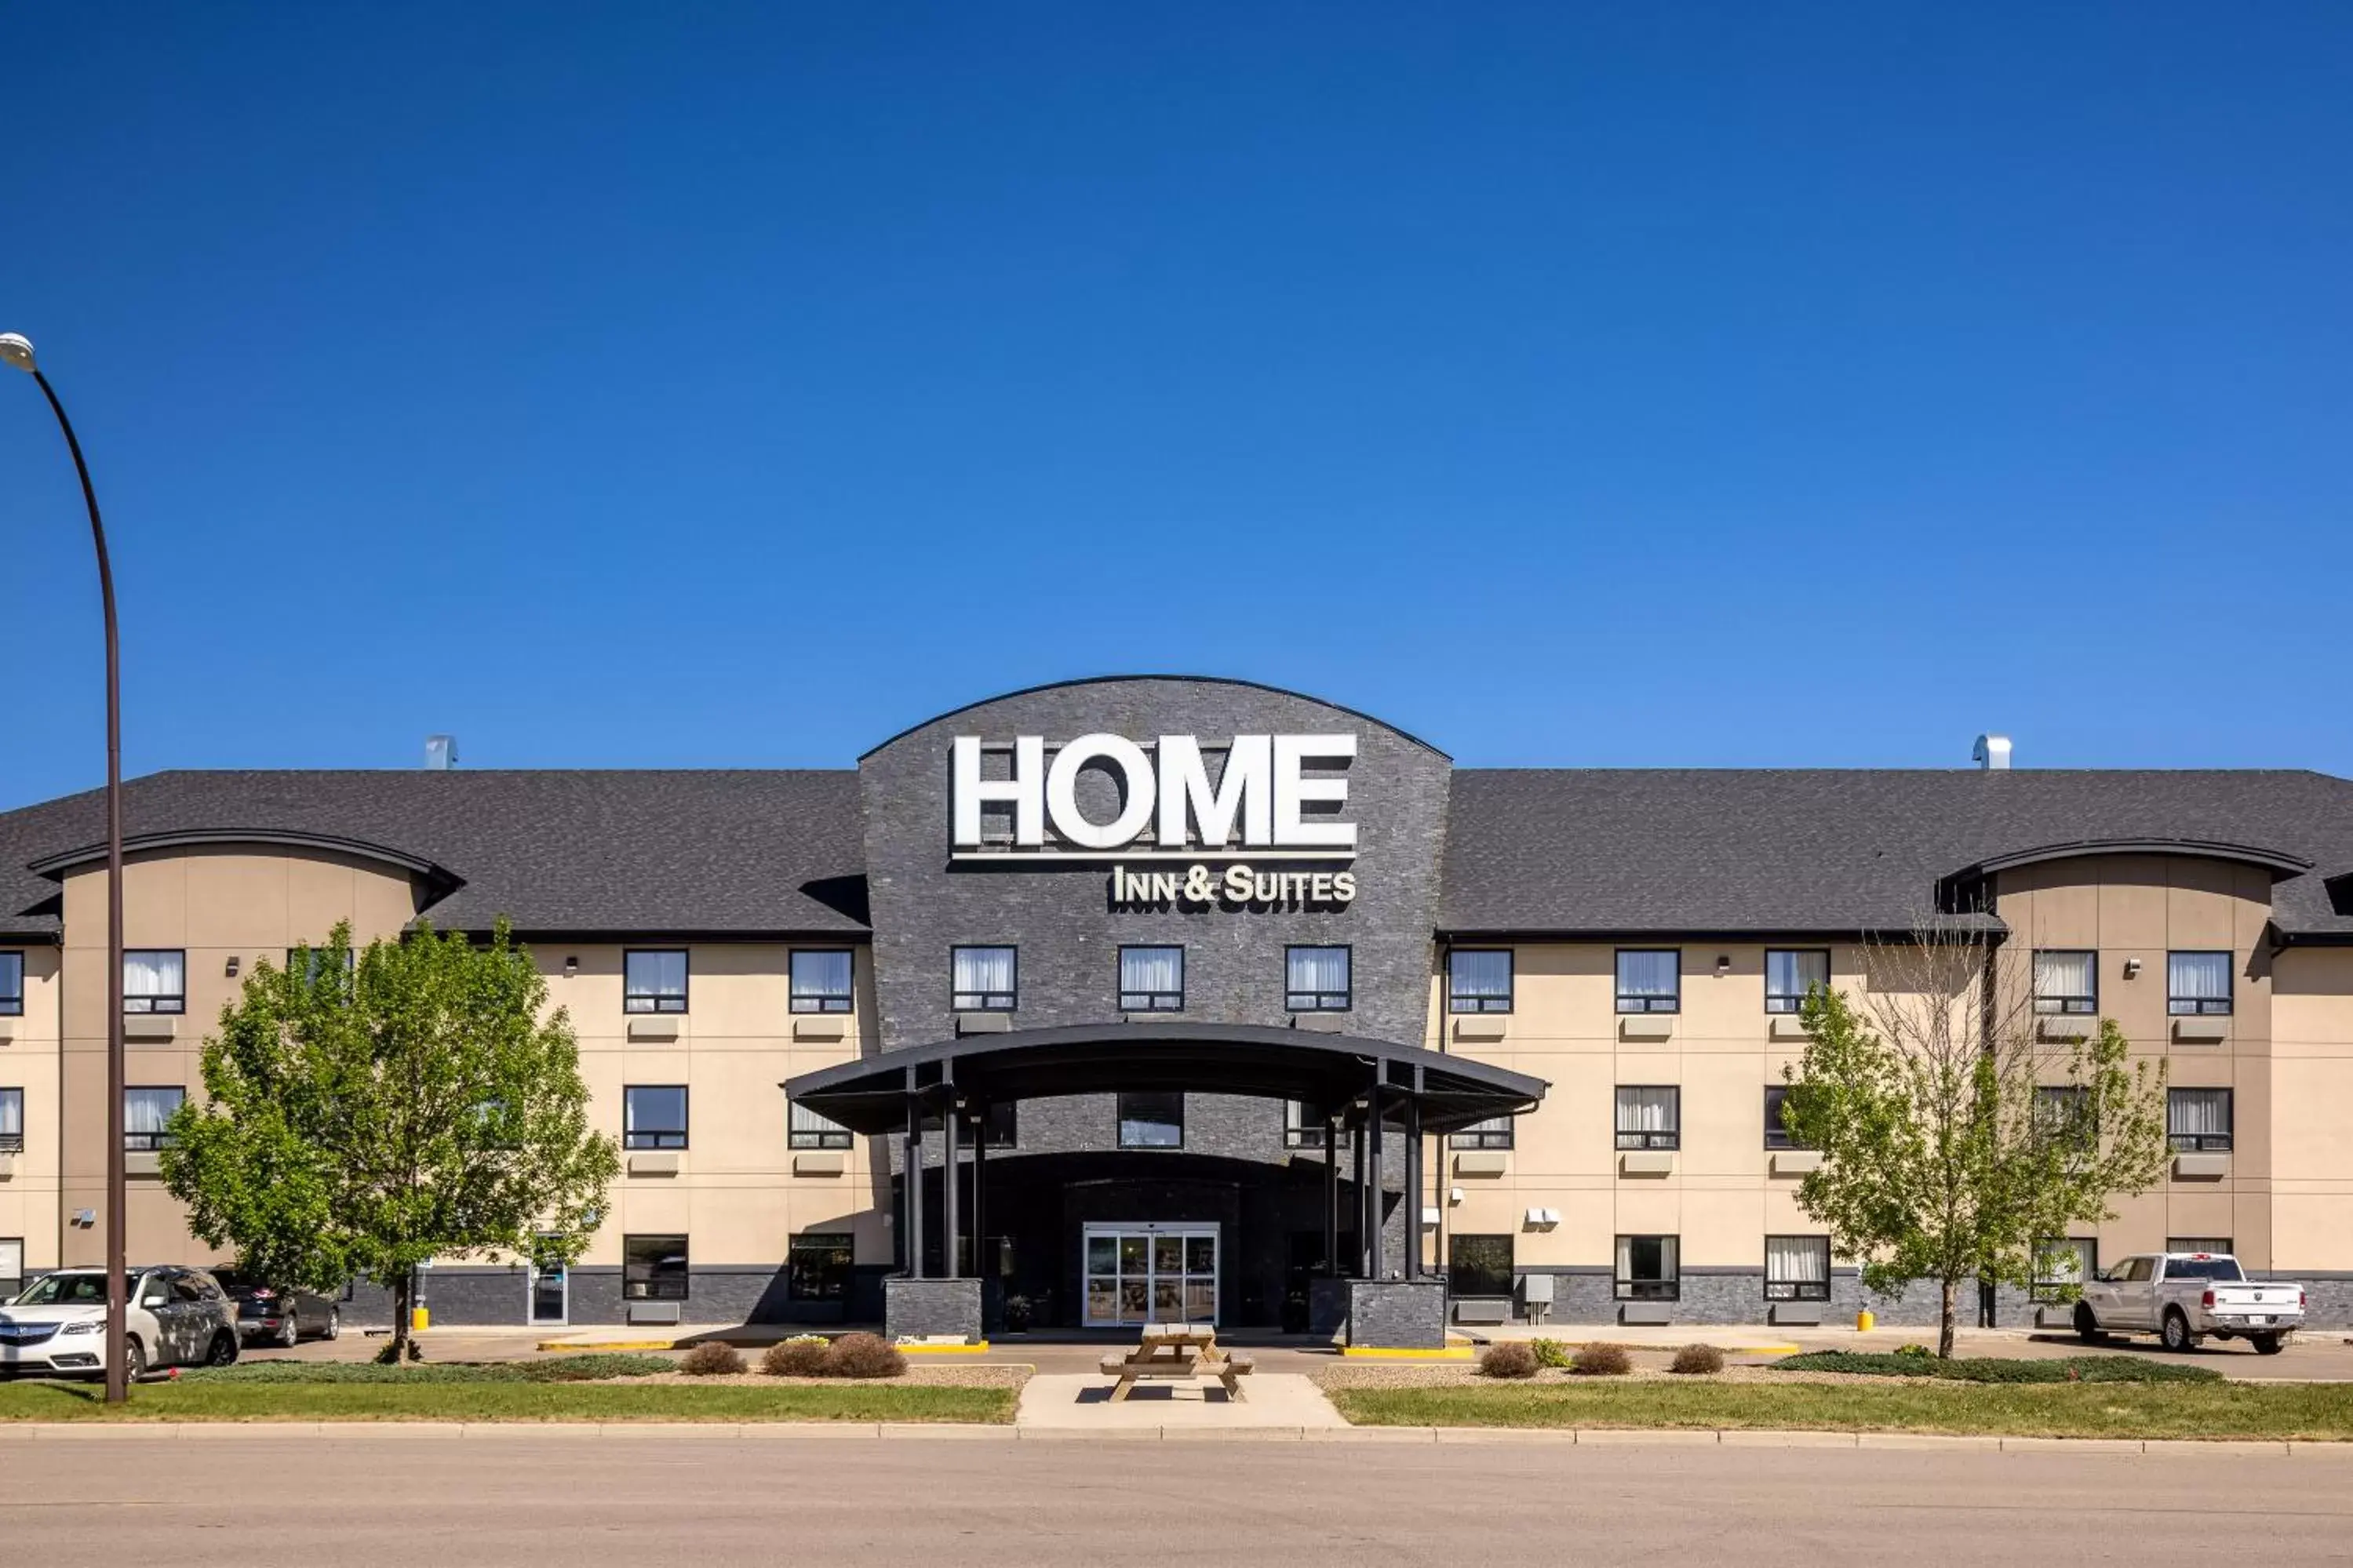 Property Building in Home Inn & Suites - Swift Current